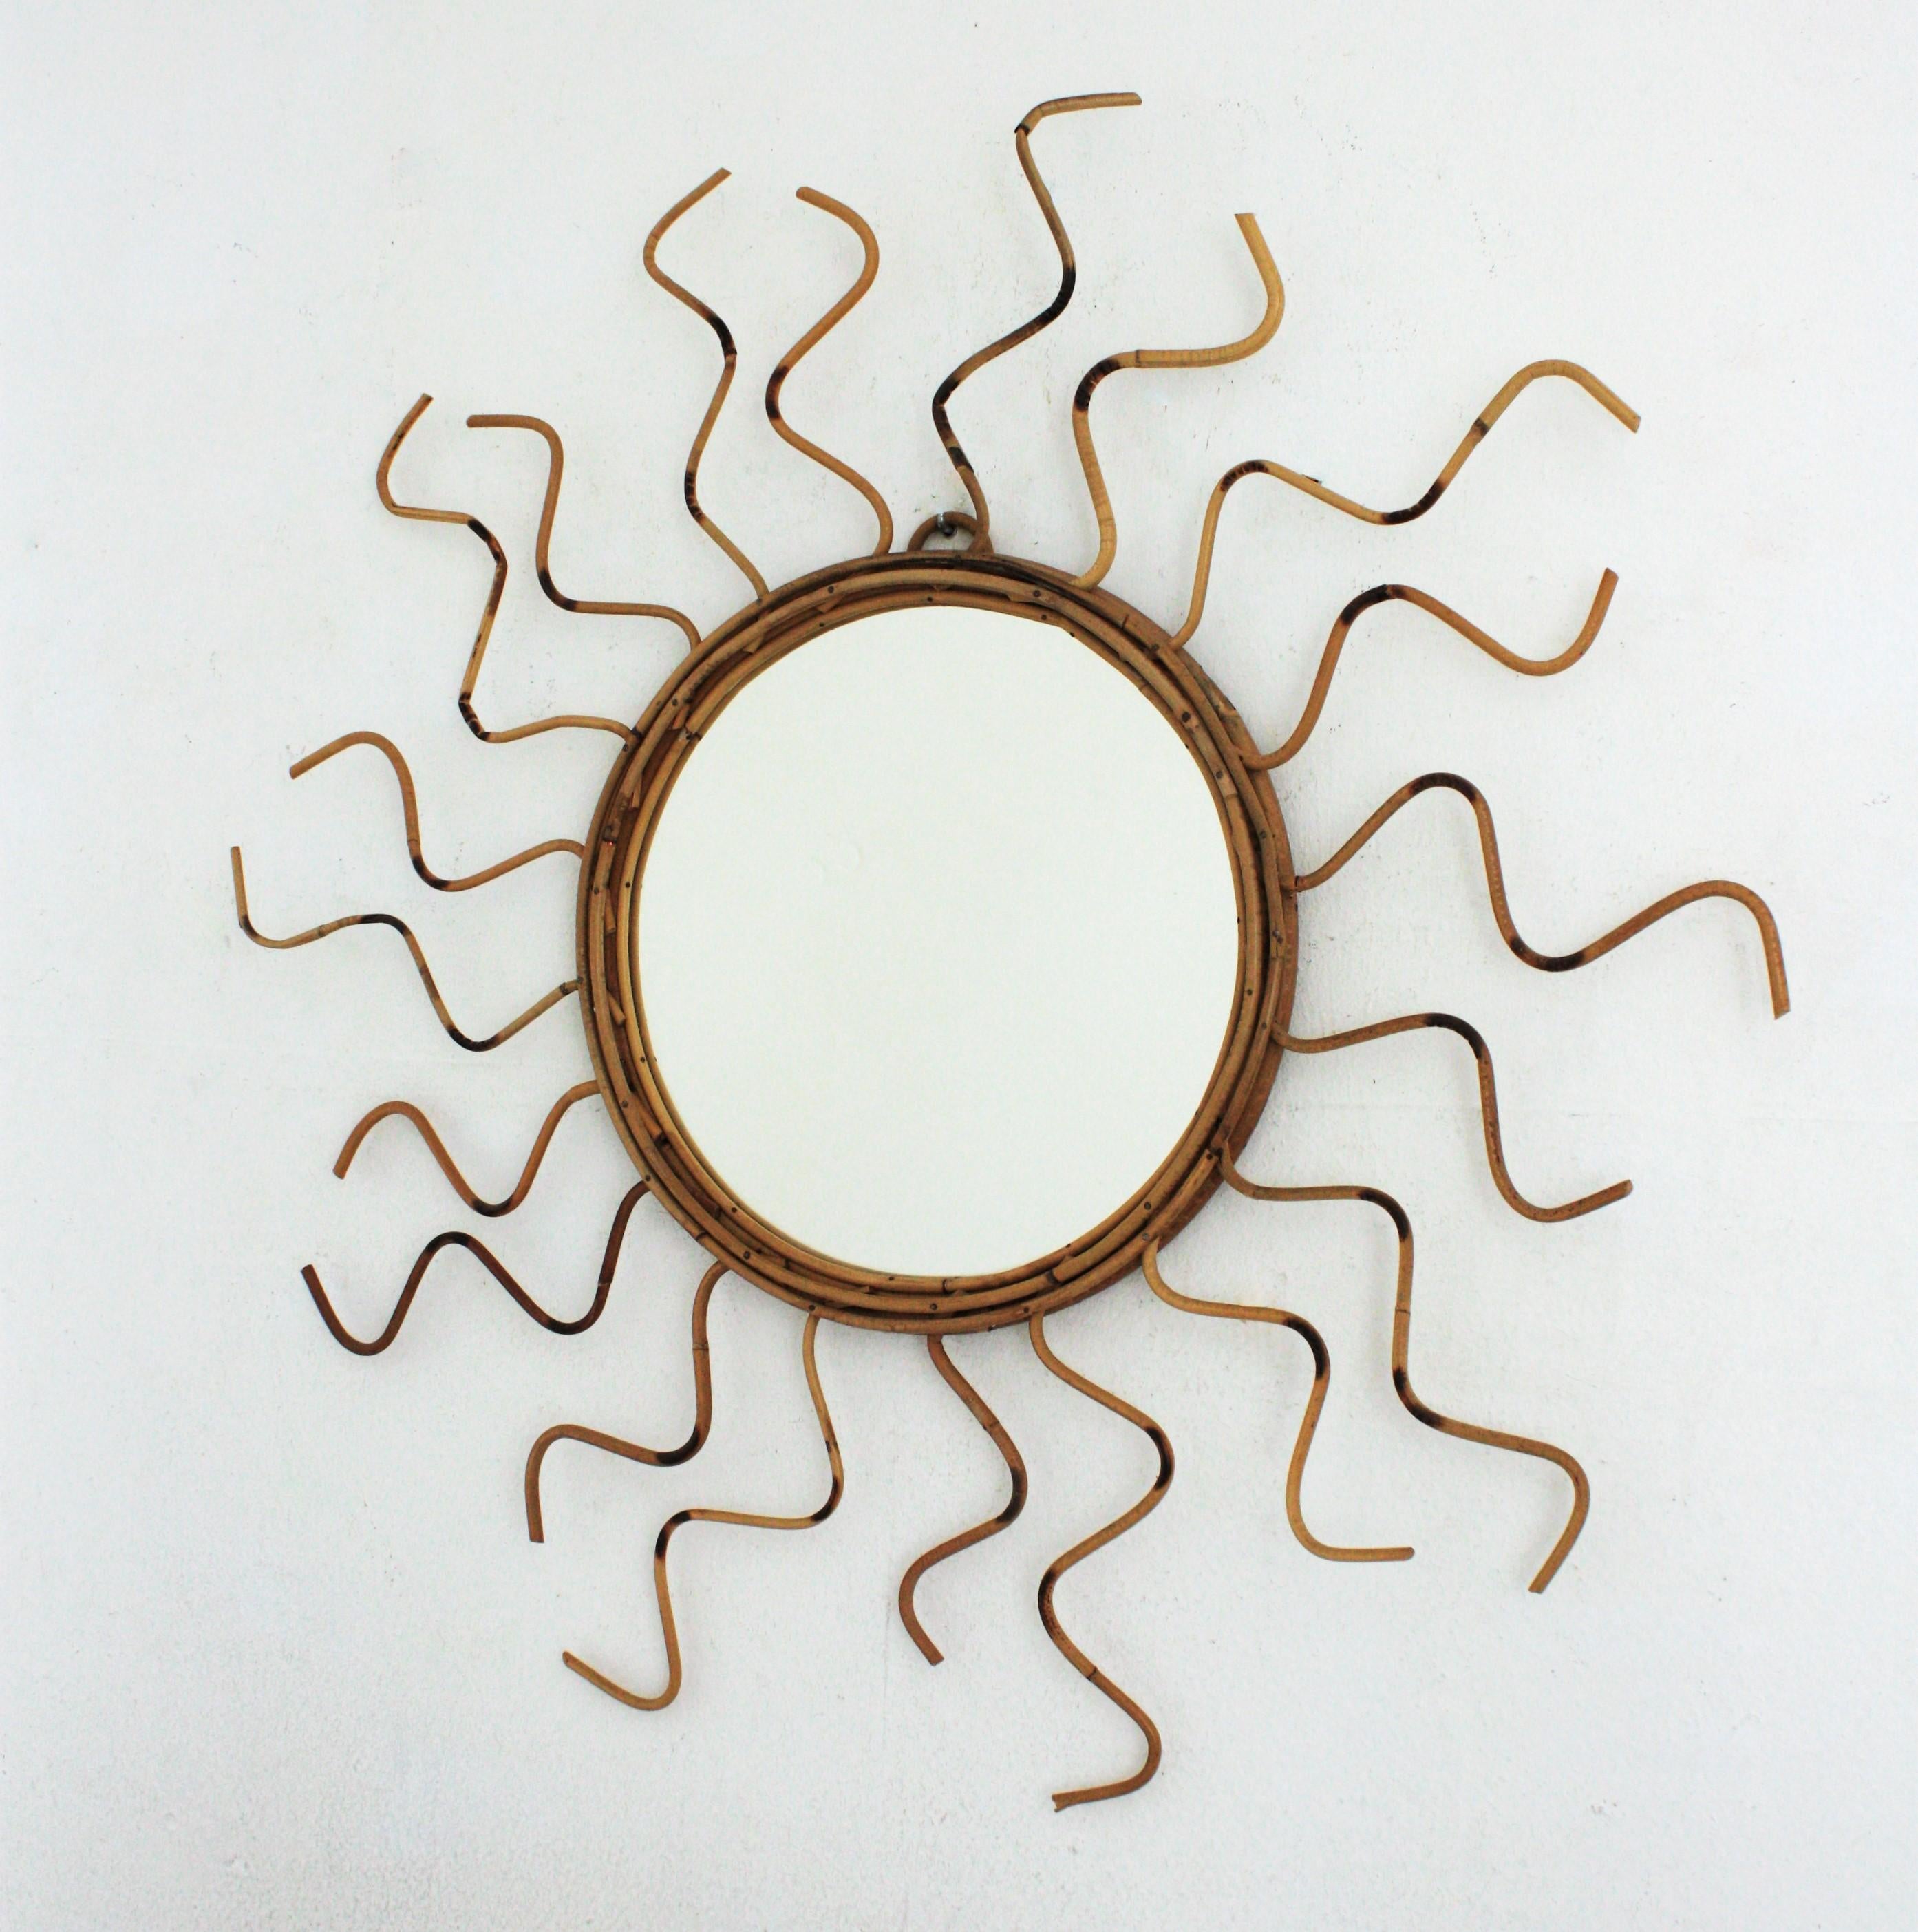 20th Century French Riviera Rattan Sunburst Mirror with Curly Rays, 1960s